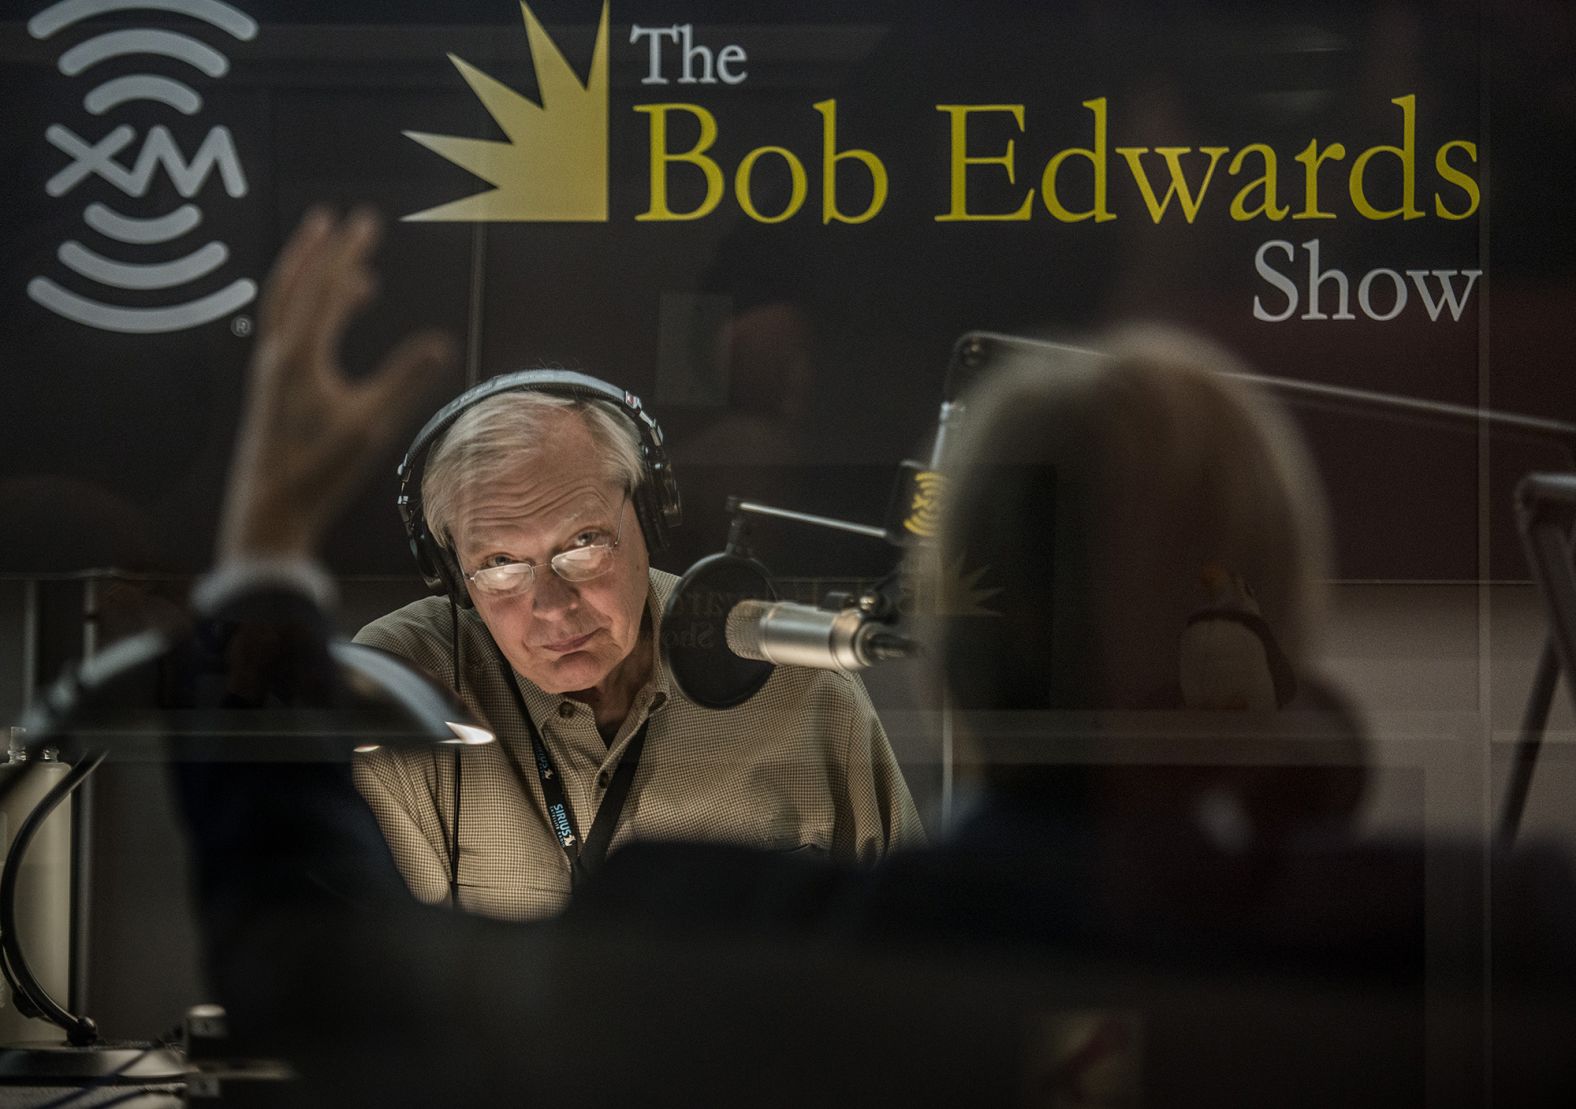 <a href="https://www.cnn.com/2024/02/12/business/bob-edwards-morning-edition-death/index.html" target="_blank">Bob Edwards</a>, the longtime National Public Radio host and a goliath of the broadcasting world, died on February 10, his wife, NPR reporter Windsor Johnston, confirmed in a Facebook post. He was 76.